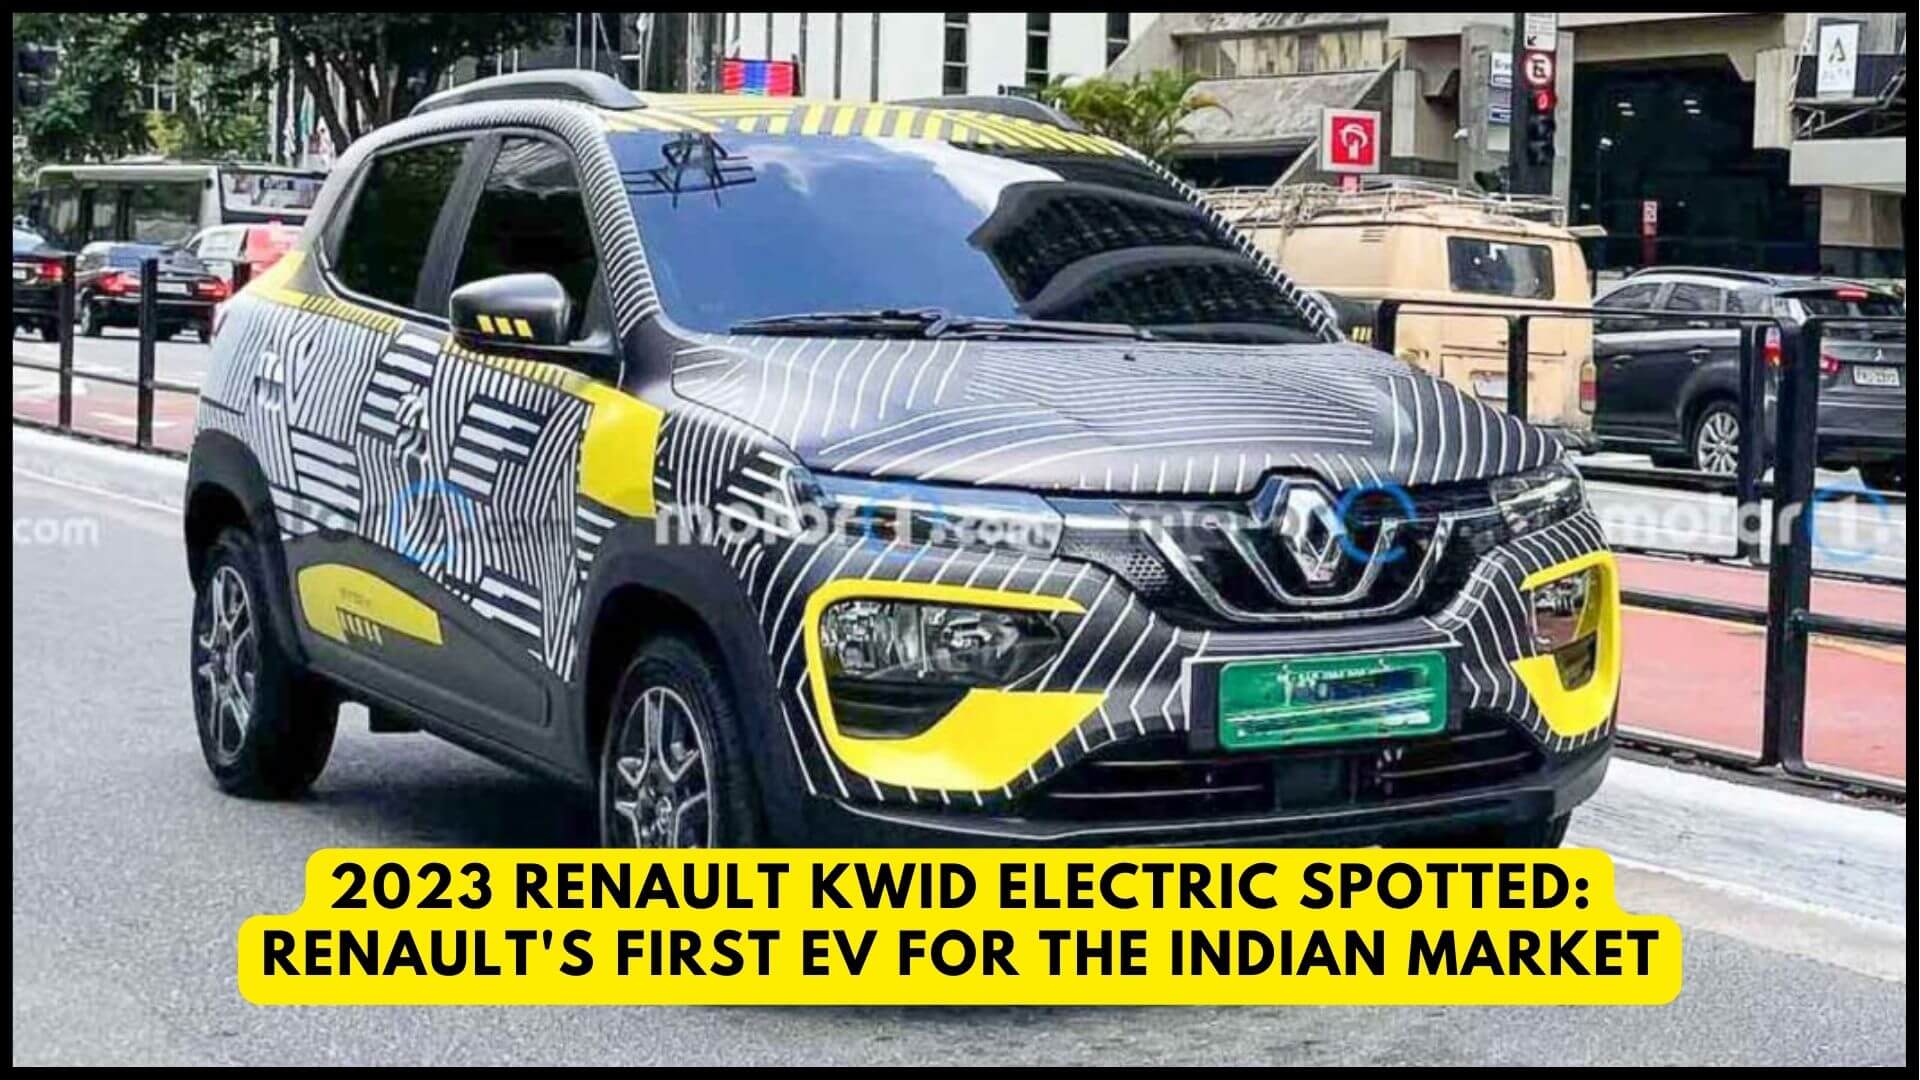 https://e-vehicleinfo.com/2023-renault-kwid-electric-spotted-renaults-first-ev-indian-market/